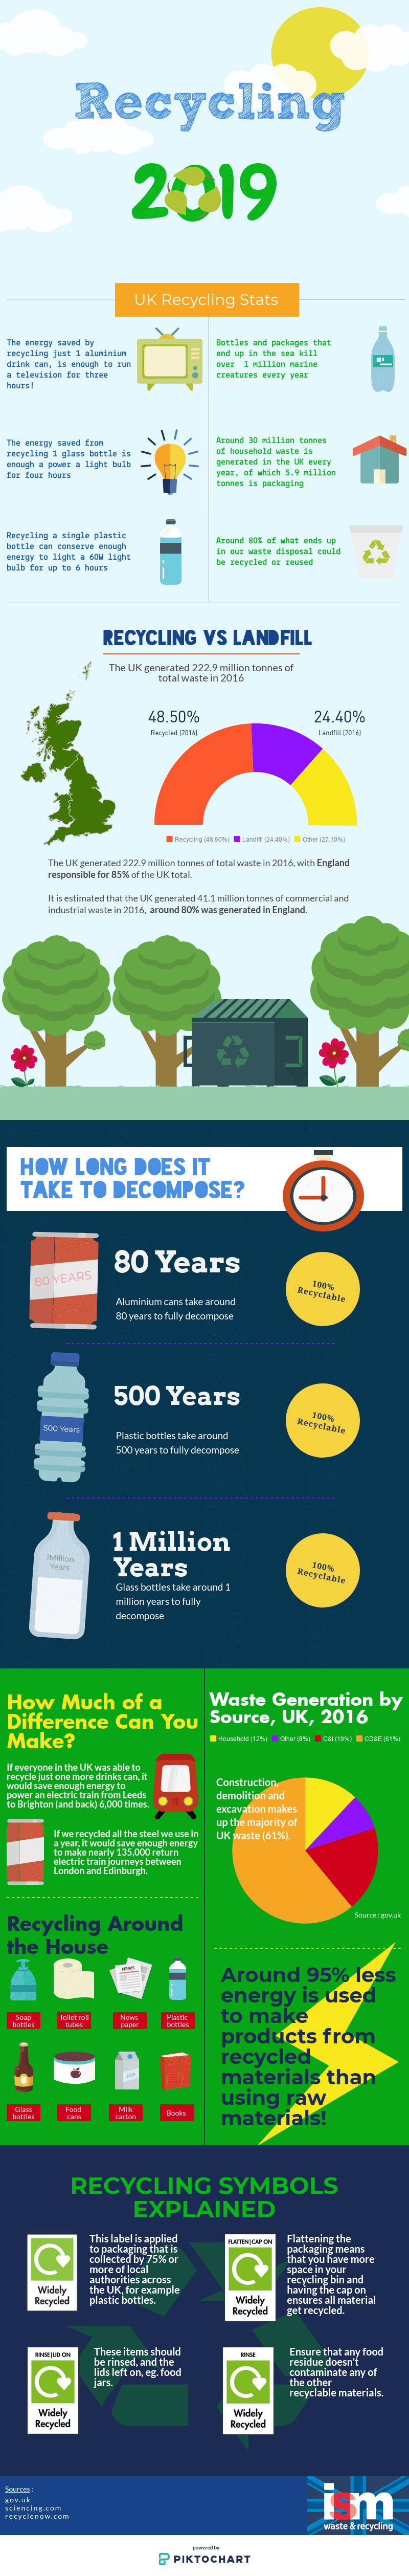 surprising-recycling-facts-you-didn-t-know-infographic